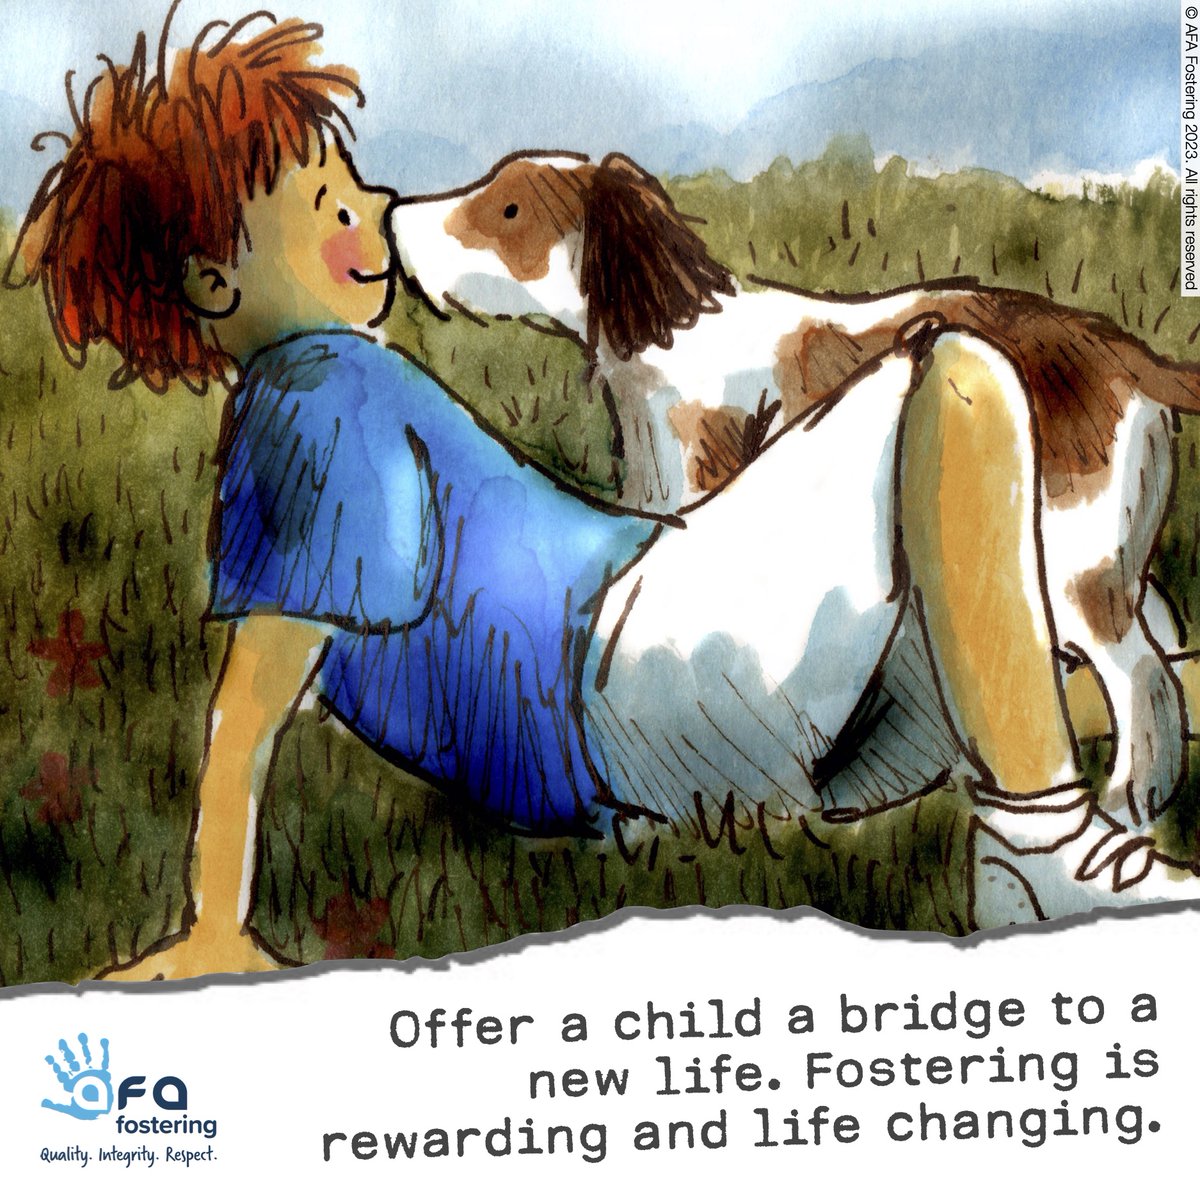 Fostering: more than a home. Offer stability, belonging, and a brighter future with AFA Fostering. Ready for a life-changing journey? Call 0333 358 3217. #BridgeToBrighterFutures #AFAFostering